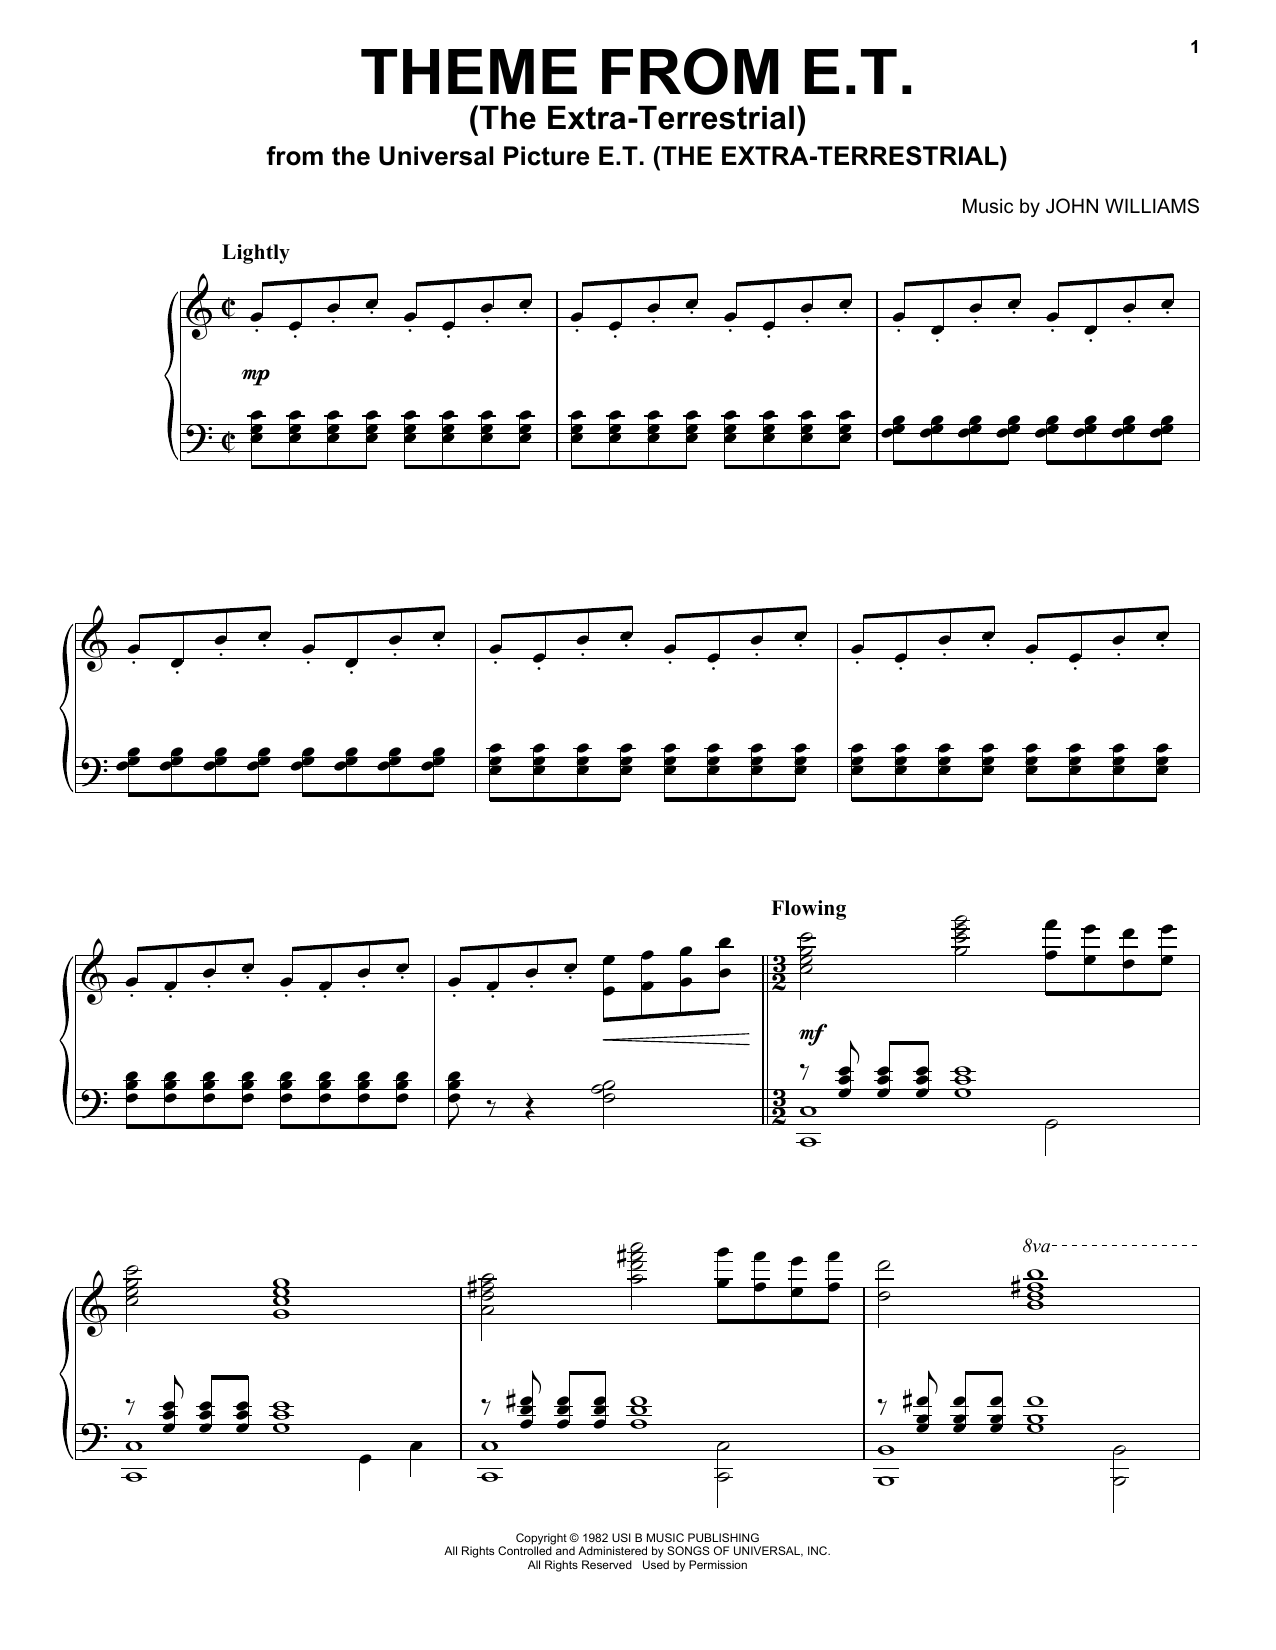 John Williams Theme From E.T. (The Extra-Terrestrial) sheet music preview music notes and score for Easy Piano including 2 page(s)